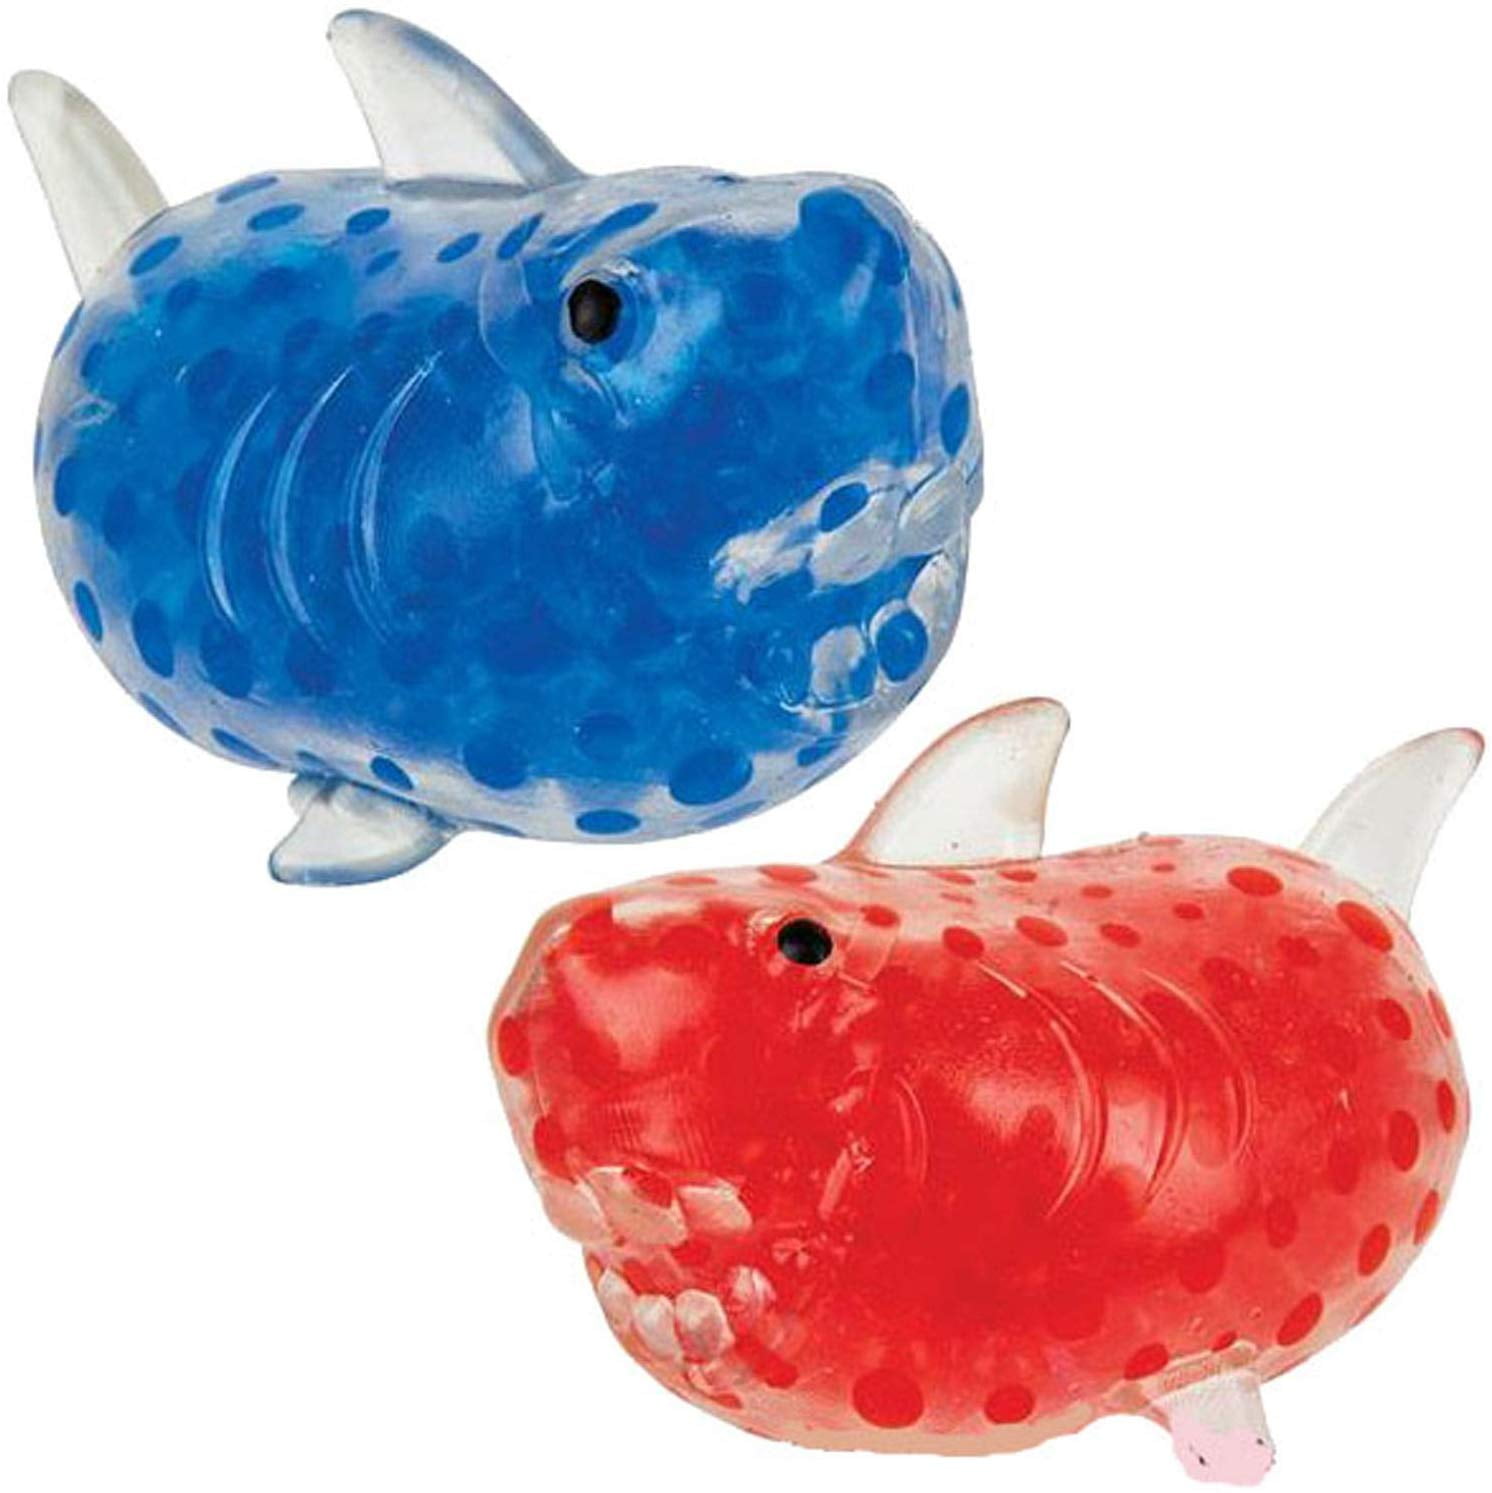 Squeezy Shark Toys for Fun Stress Relief ArtCreativity Stretch and Squeeze Shark Toys for Kids Set of 4 Kids Stocking Stuffers Cool Aquatic Birthday Party Favors Sensory Toys for Boys and Girls